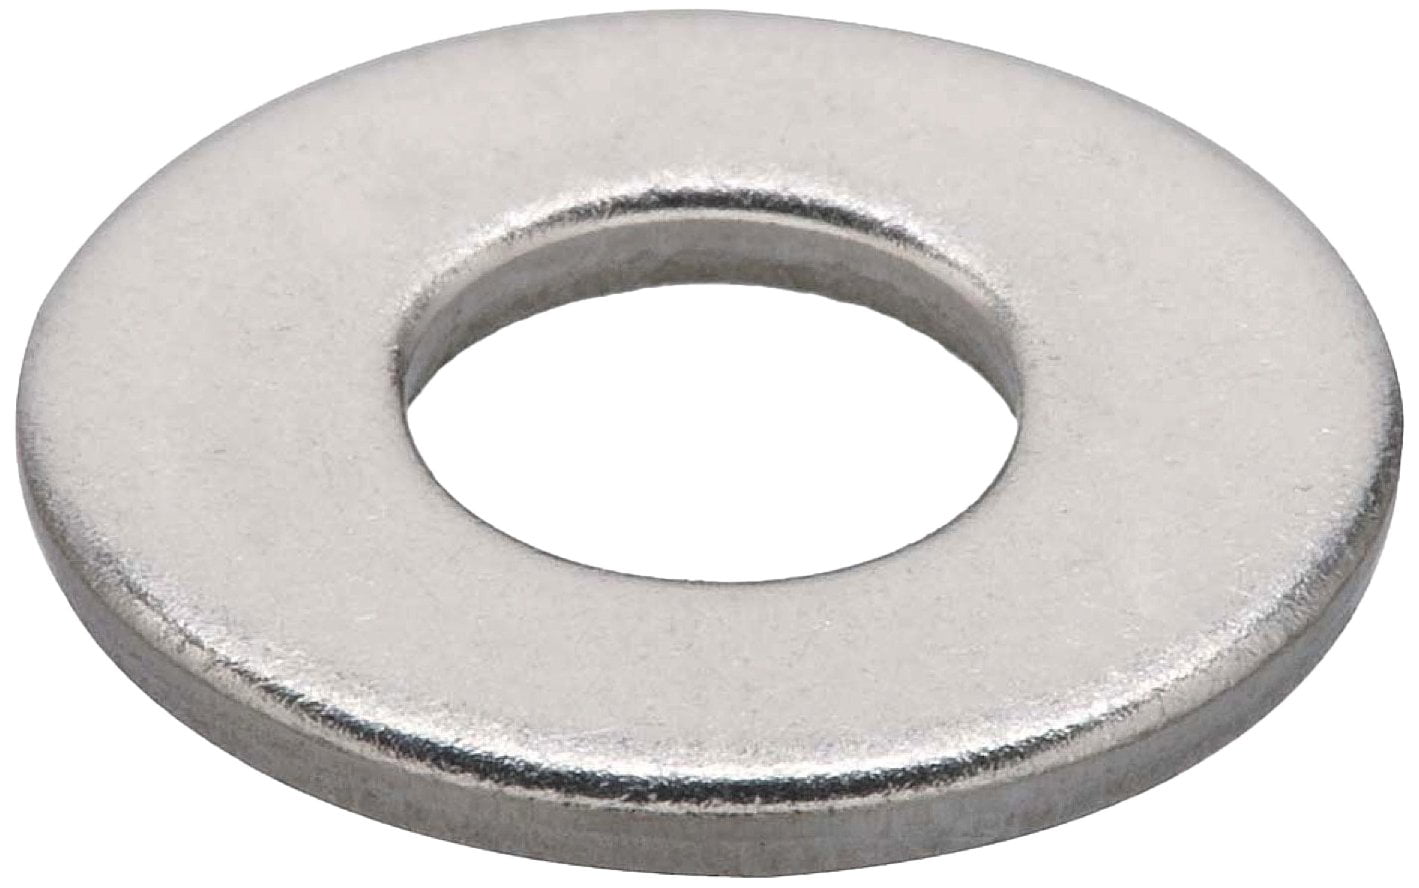 M4 Flat Washer A2 Stainless Steel Package Qty 100 